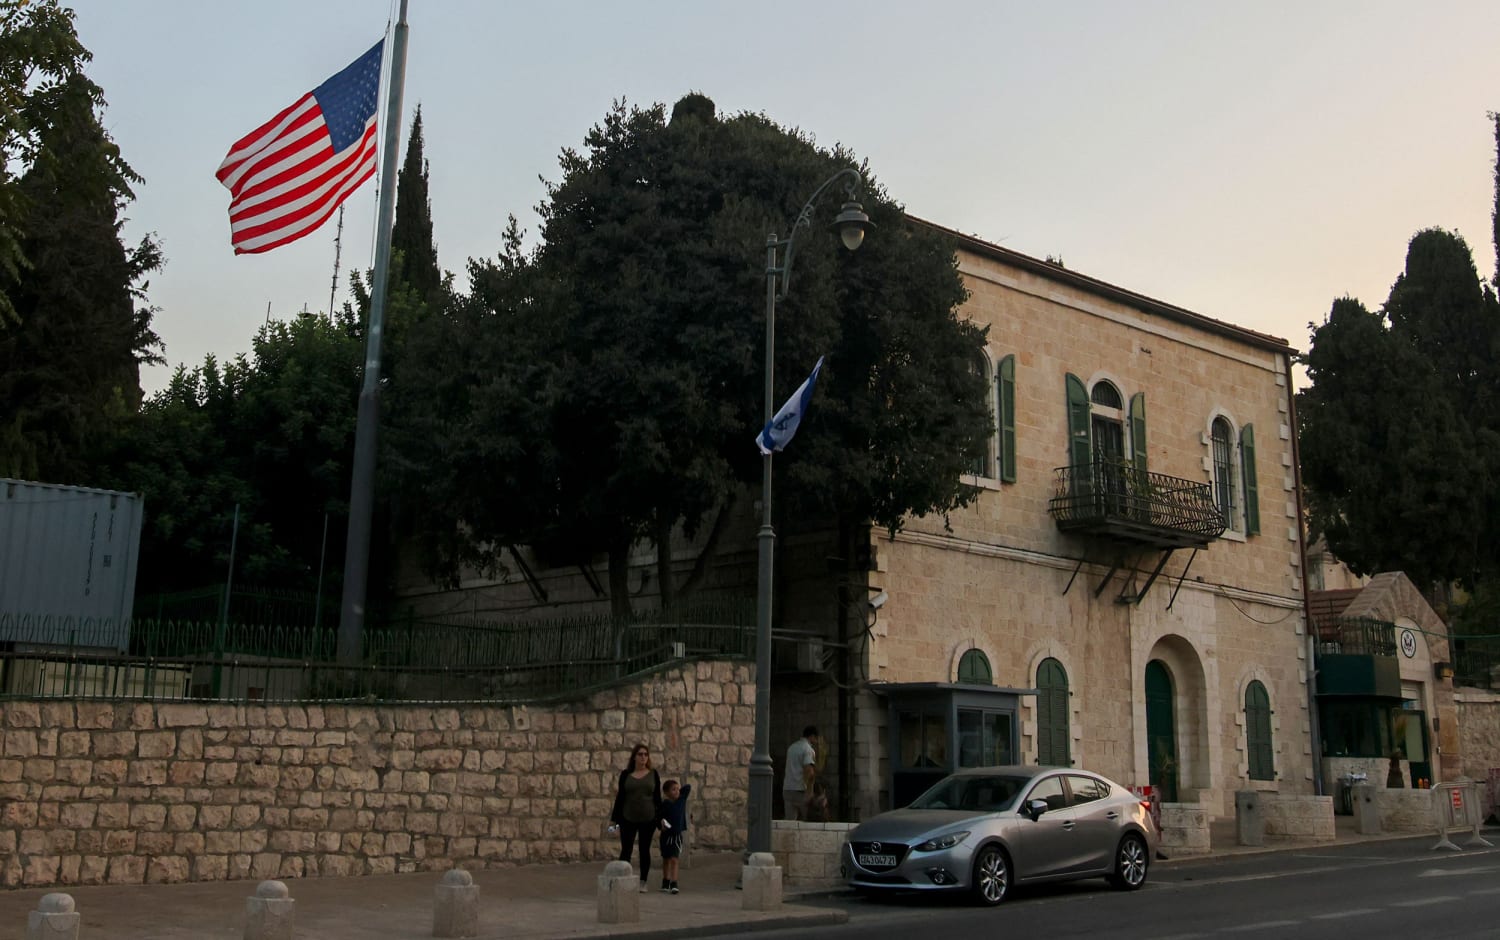 Biden wants to reopen the U.S. consulate in Jerusalem. The Israeli gov’t is strongly opposed.